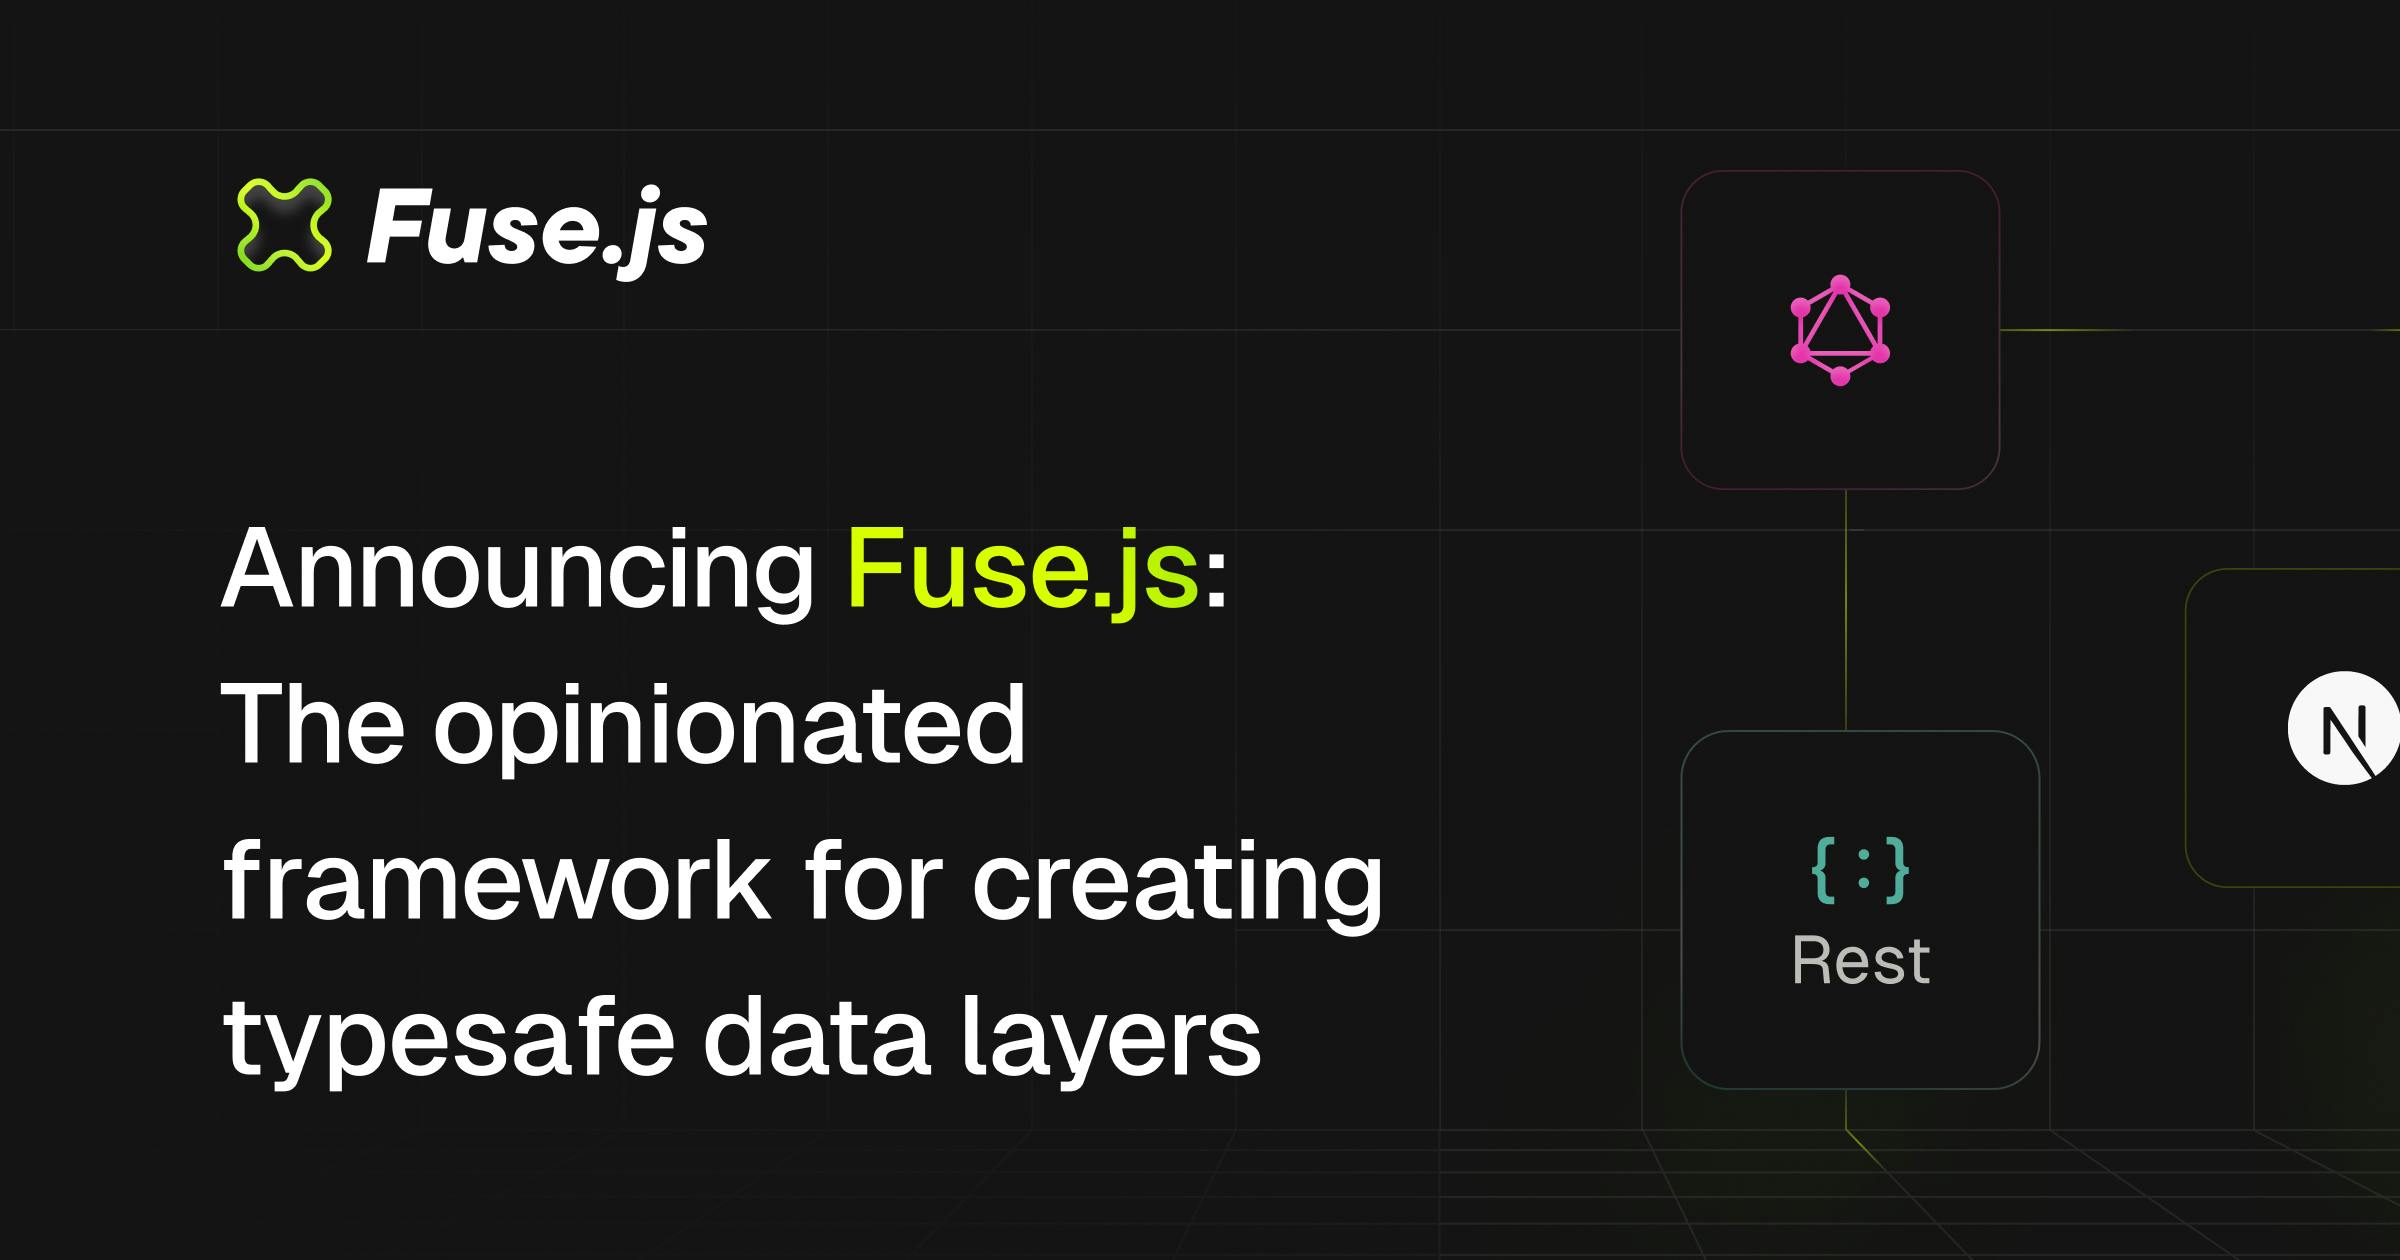 Announcing Fuse.js: The opinionated framework for creating typesafe data layers